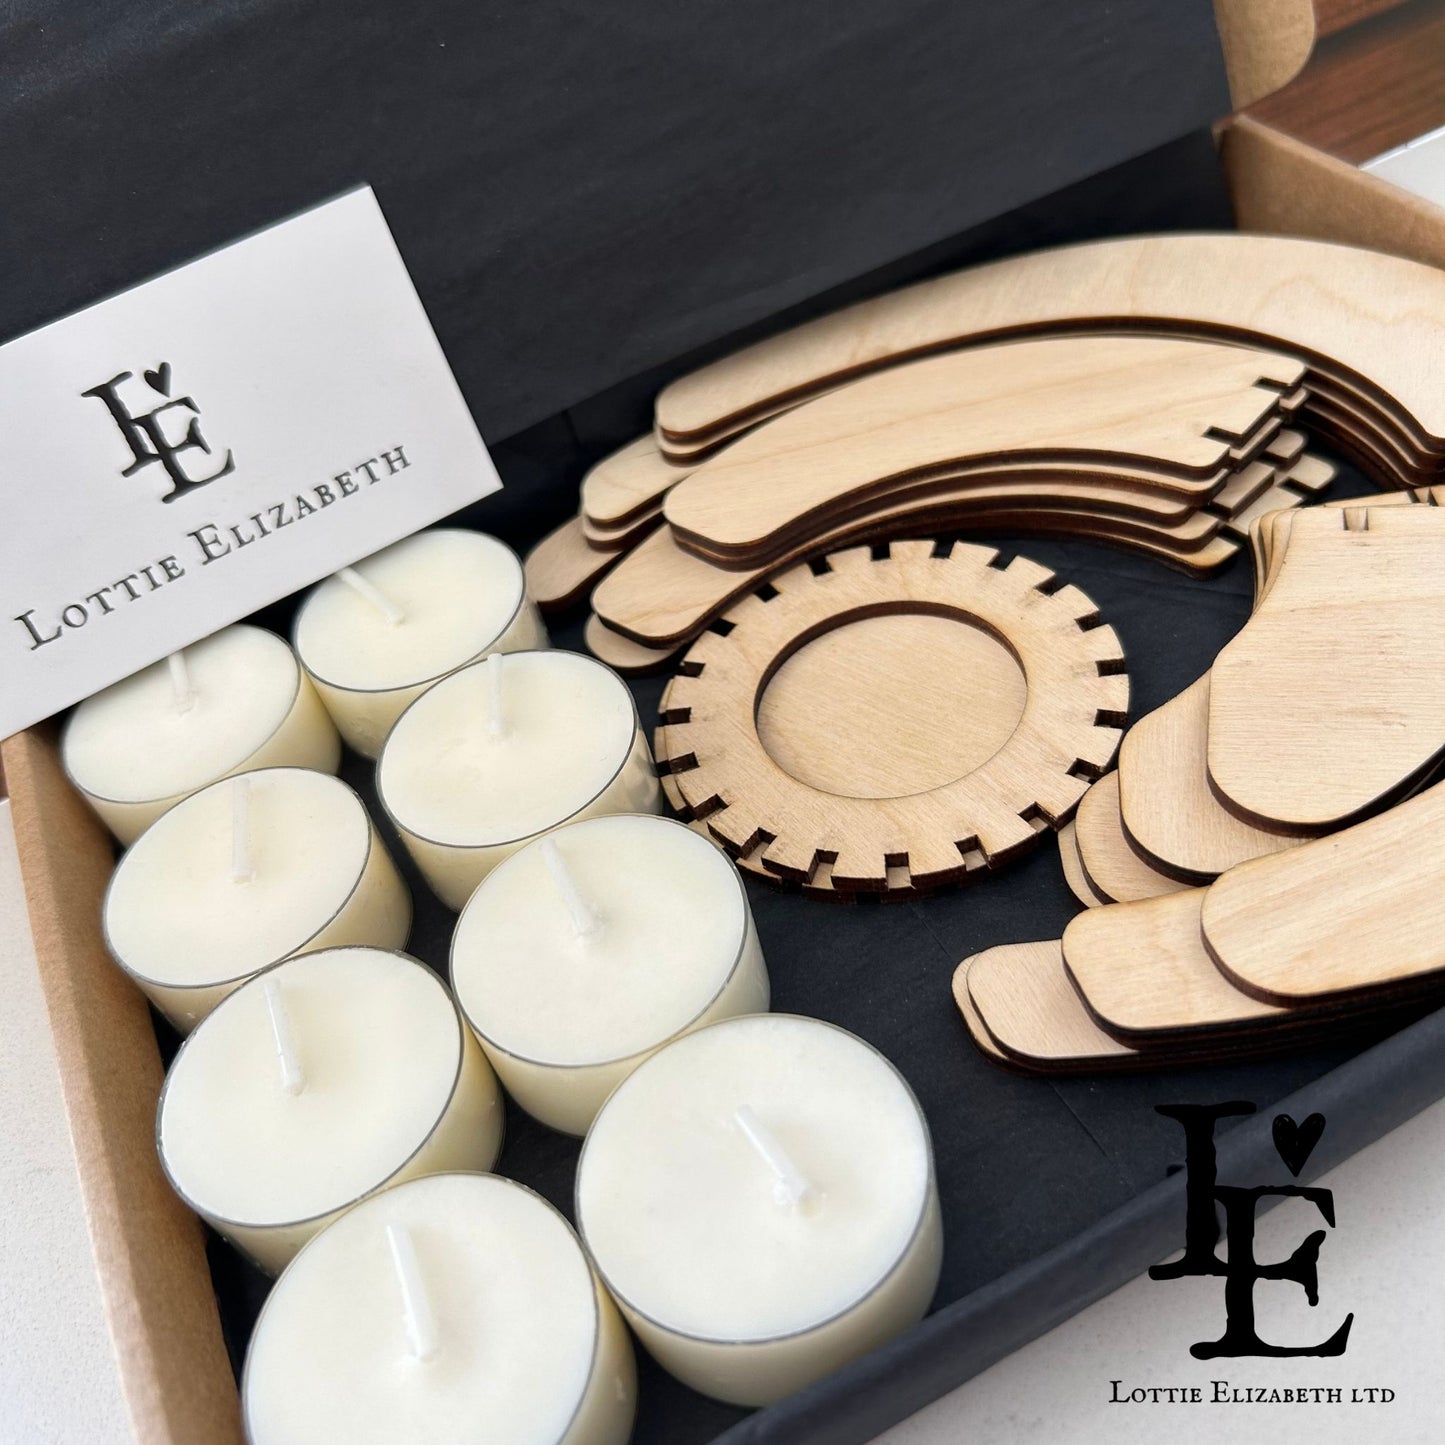 Handcrafted Birch Wood Tealight Holder - Natural Elegance for Home Ambiance